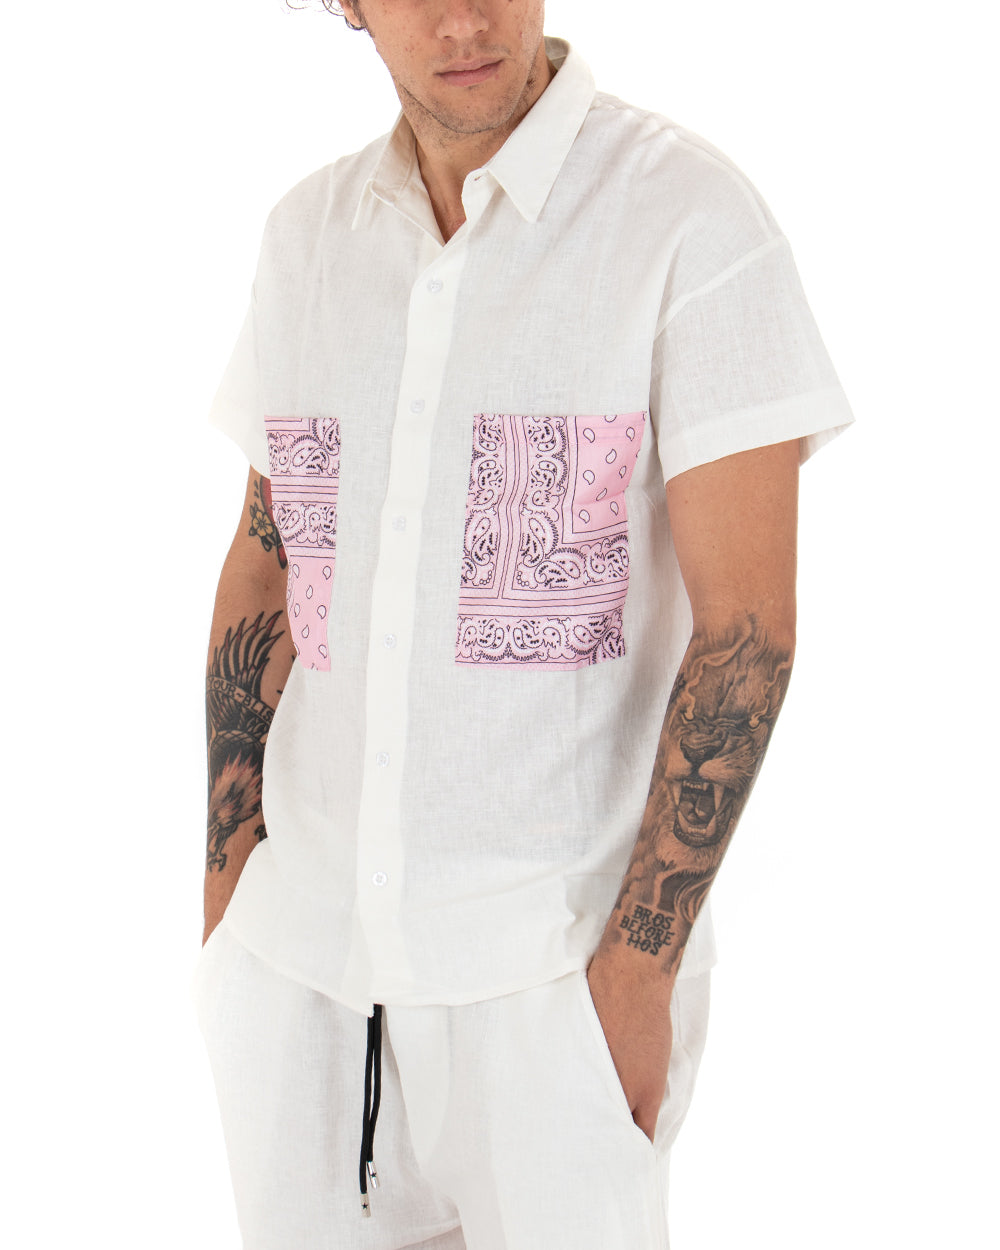 Complete Coordinated Set for Men Linen Shirt with Bermuda Collar Outfit White GIOSAL-OU2044A